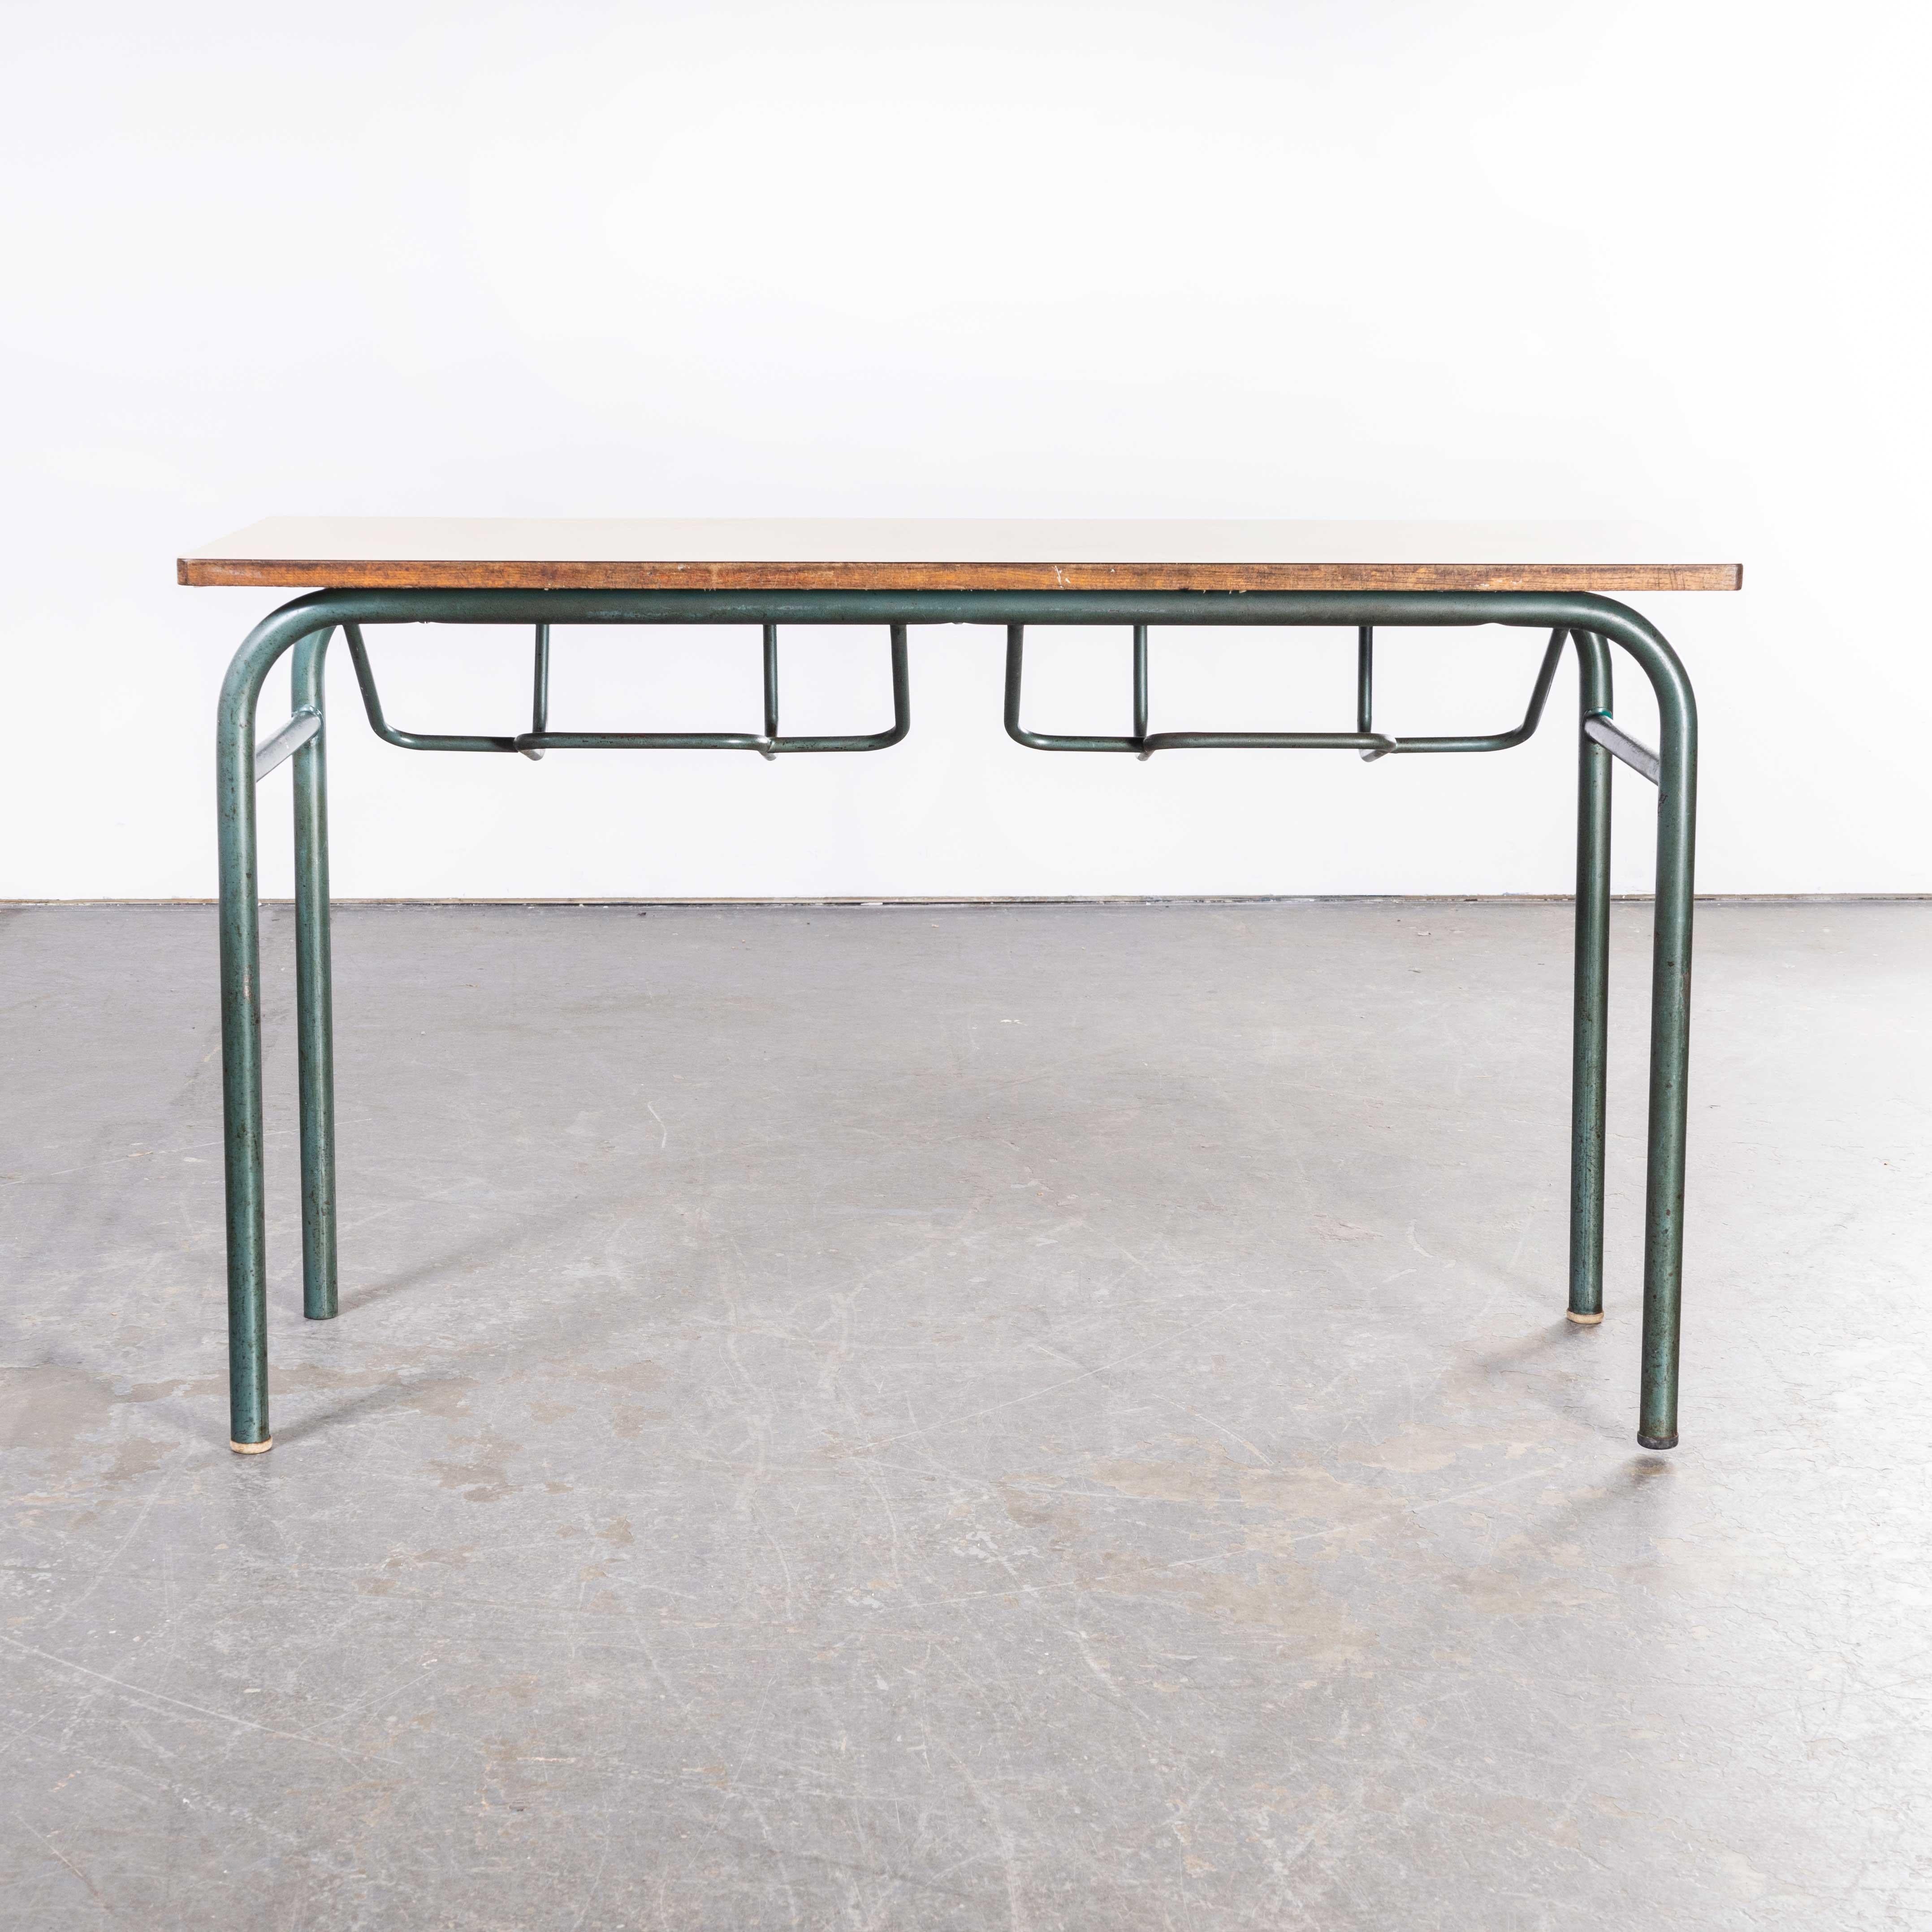 1960’s French mid century Mullca school desk – console table 
1960’s French mid century Mullca school desk – console table. In 1947 Robert Muller and Gaston Cavaillon created the company that went on to develop arguably the most famous French